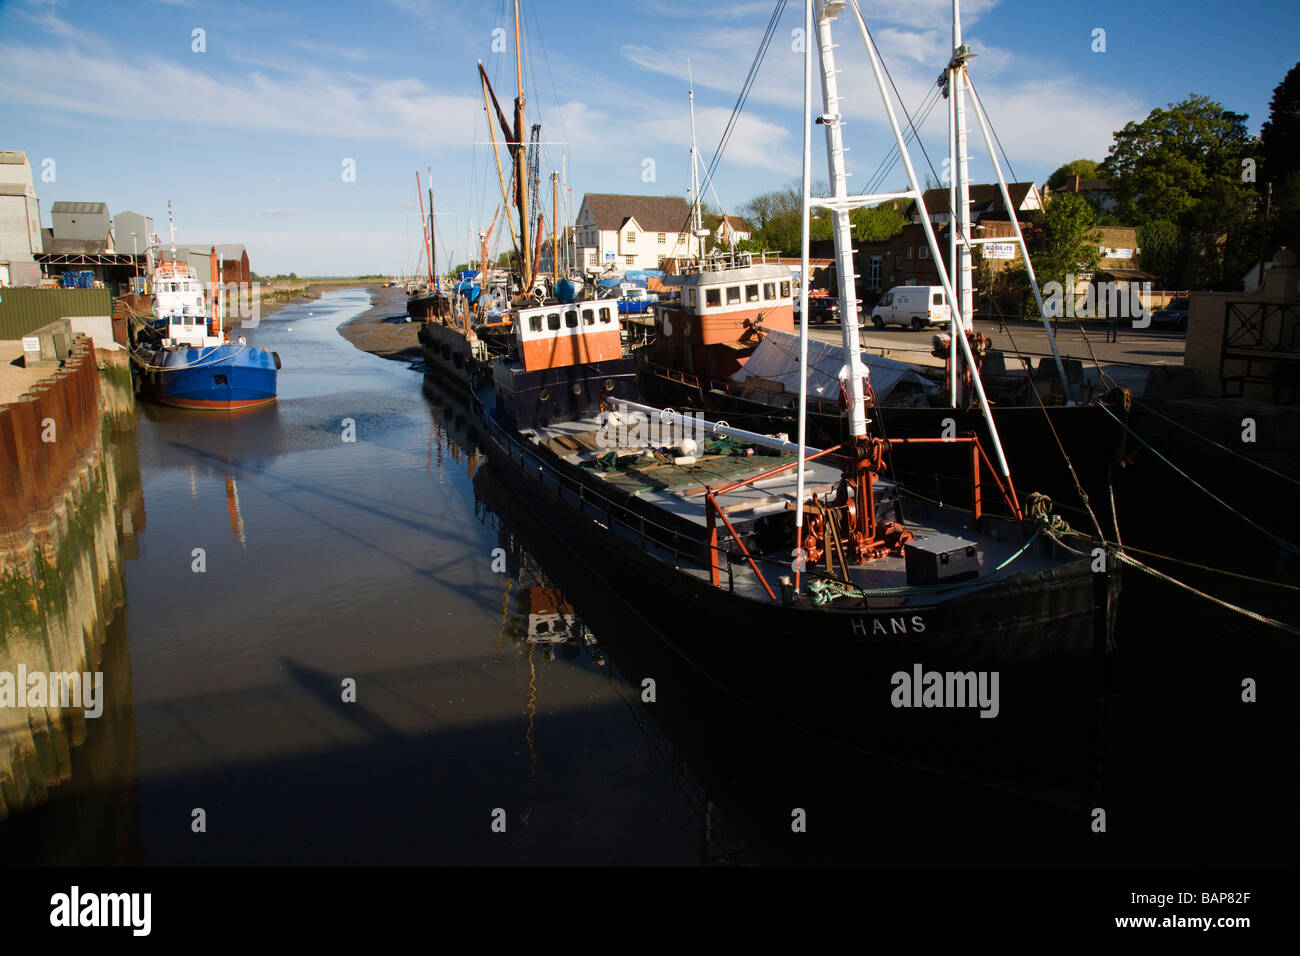 Boats on the river Blackwater at Maldon in Essex, England, UK. Stock Photo